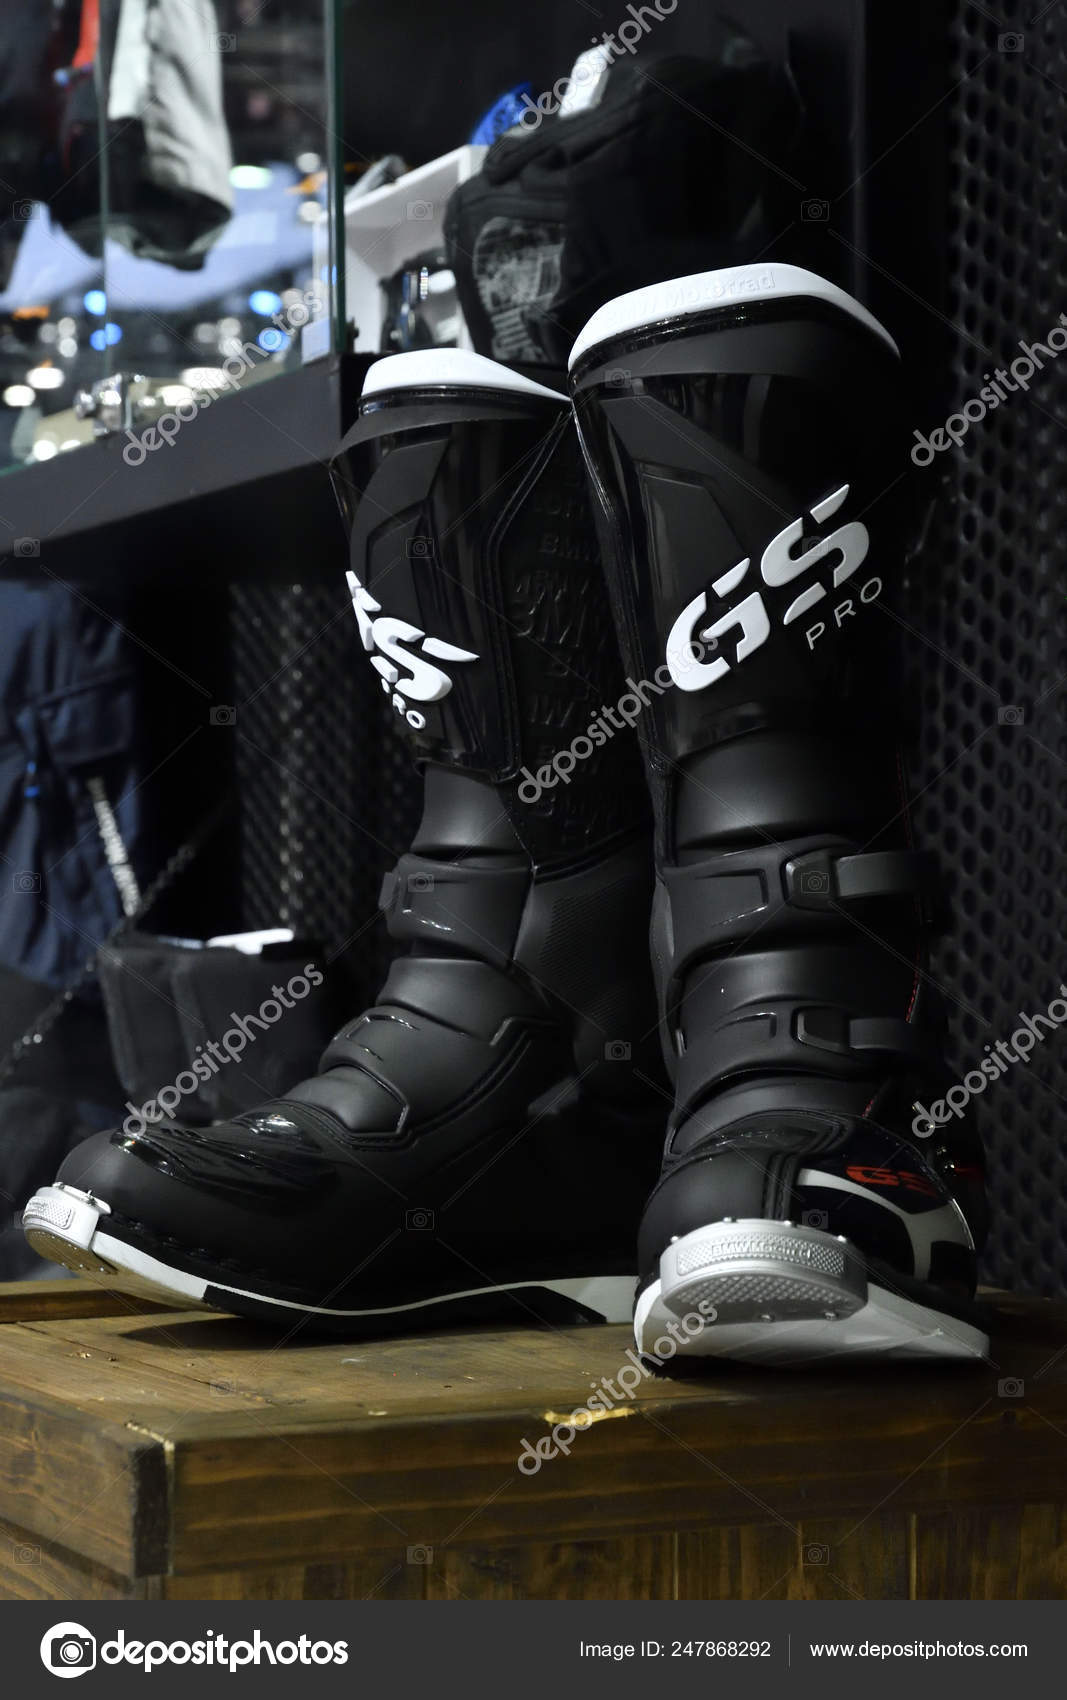 BMW Motorcycles GS Pro Boots, high 